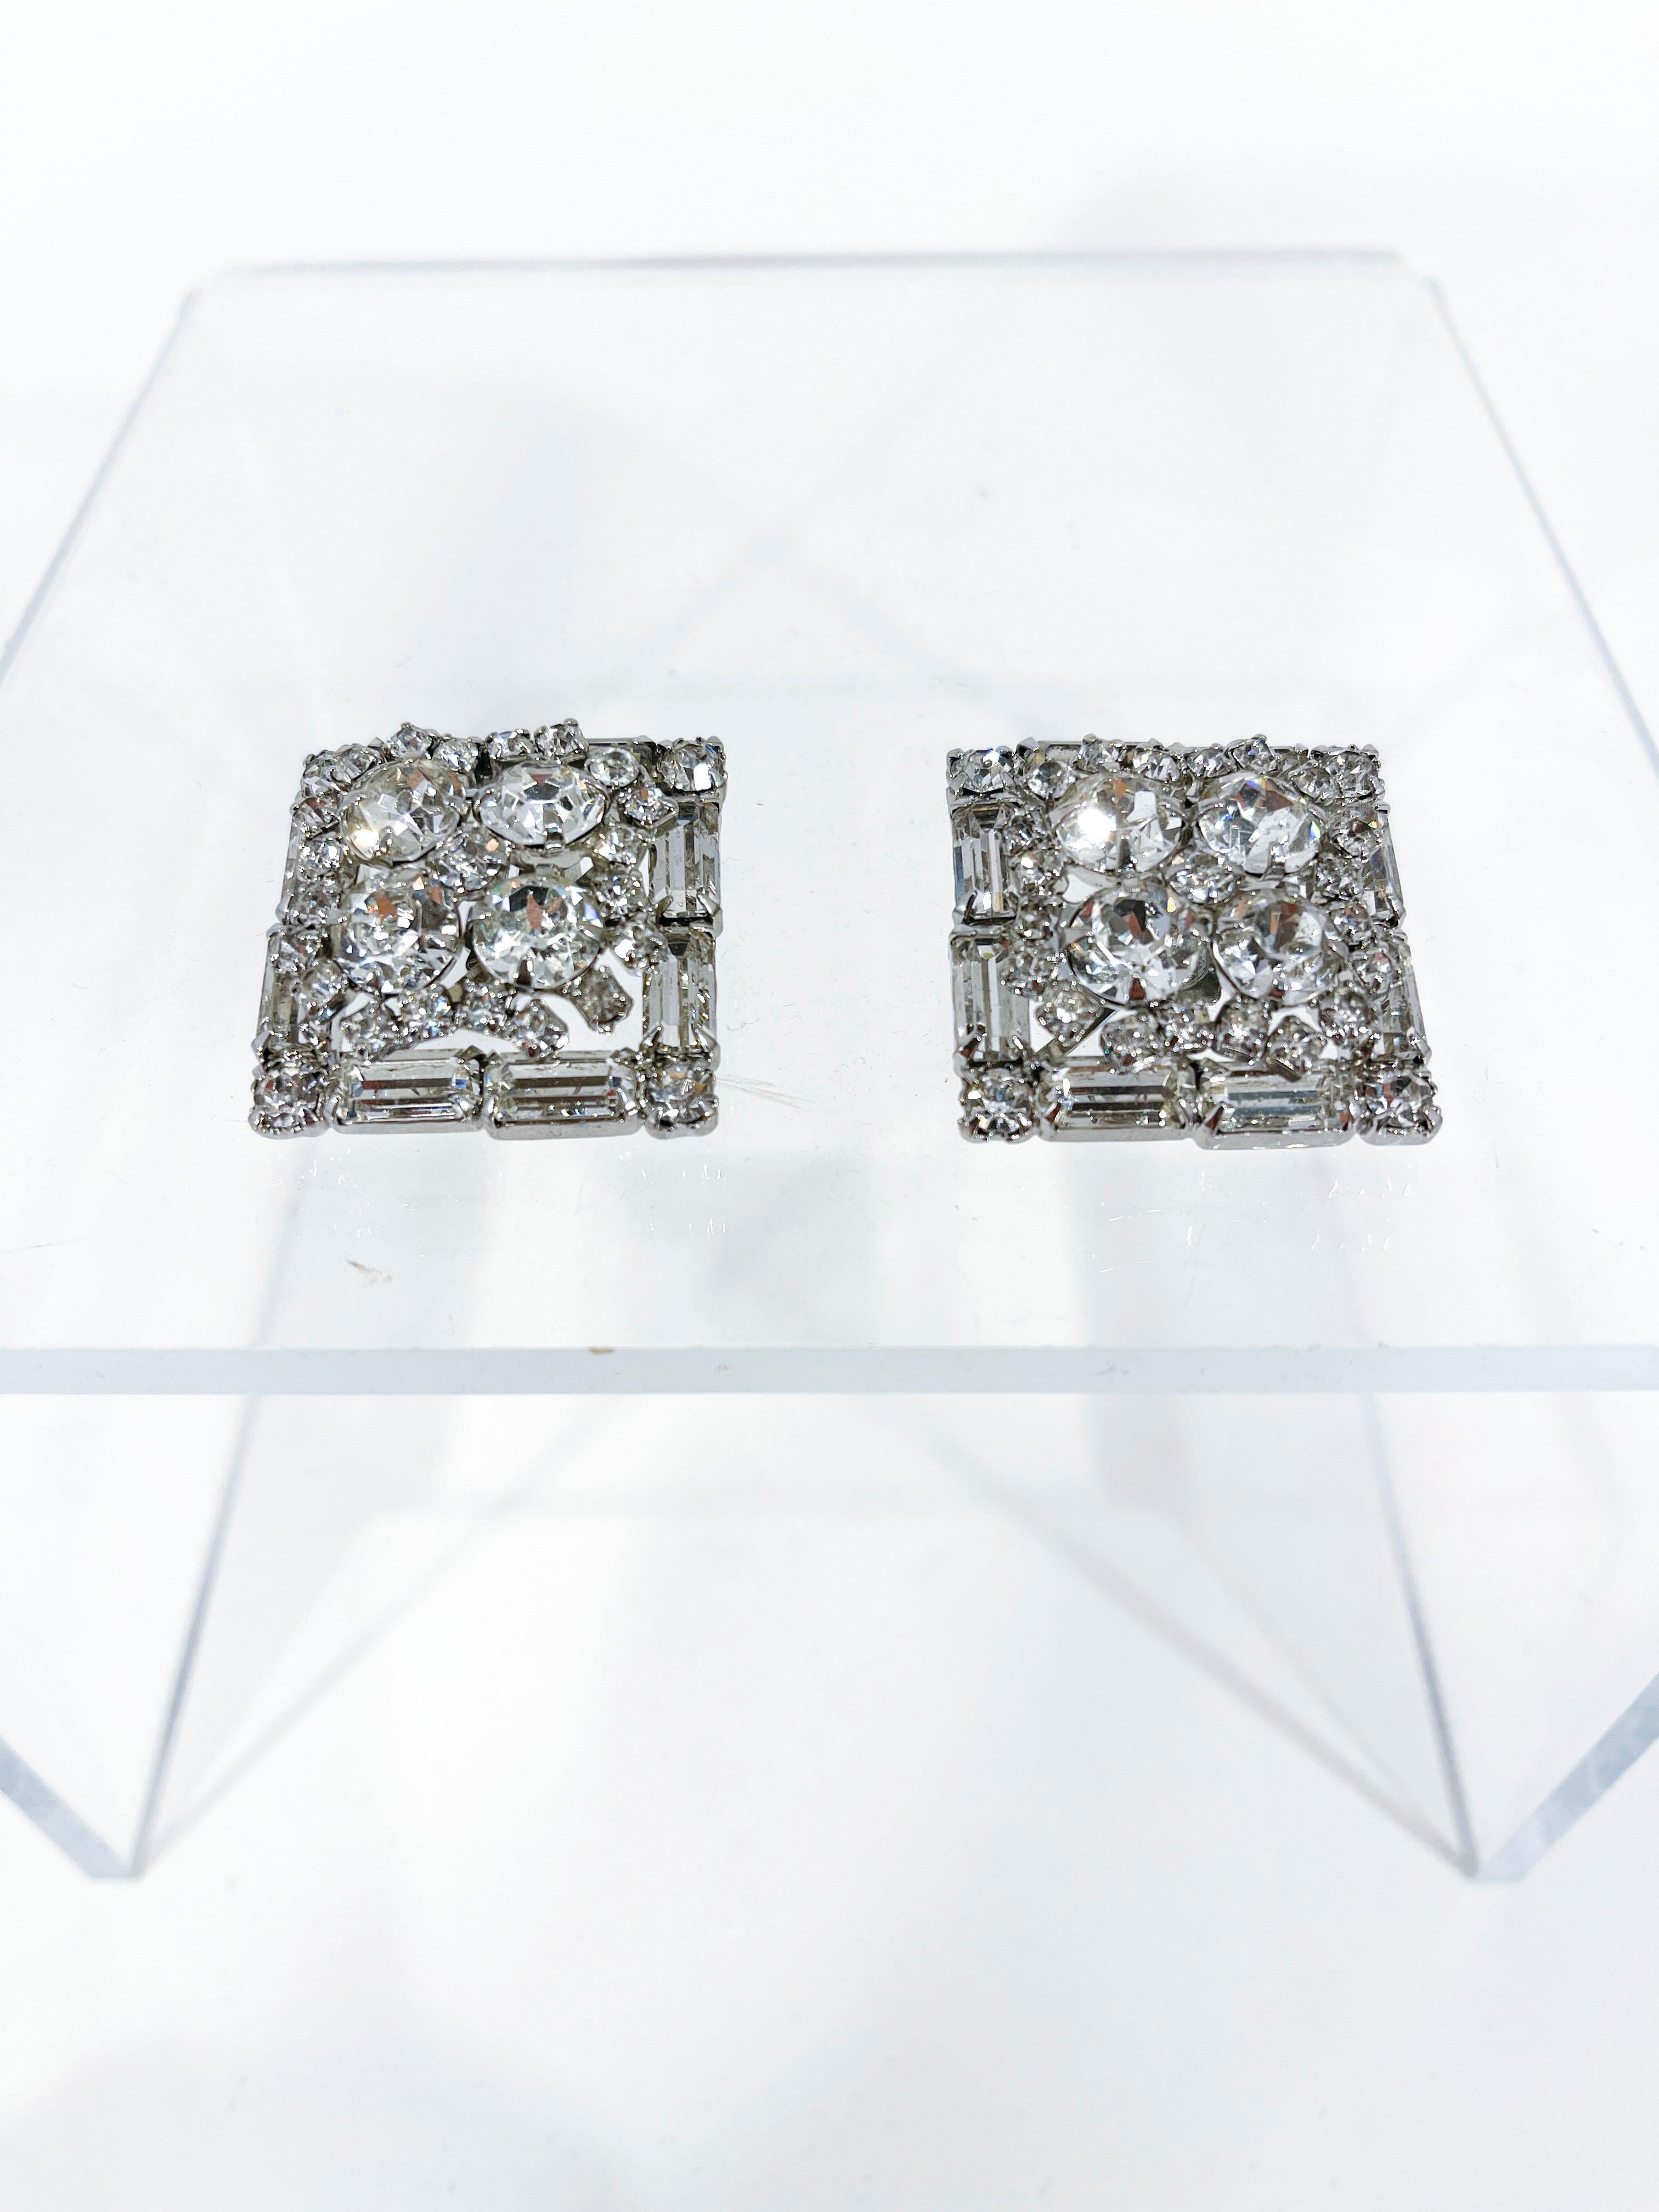 1950's Weiss rhinestone clip-on earrings with multi-cuts of stones in varying sizes. These stones are configured in a square geometric pattern and set in a silver tone.